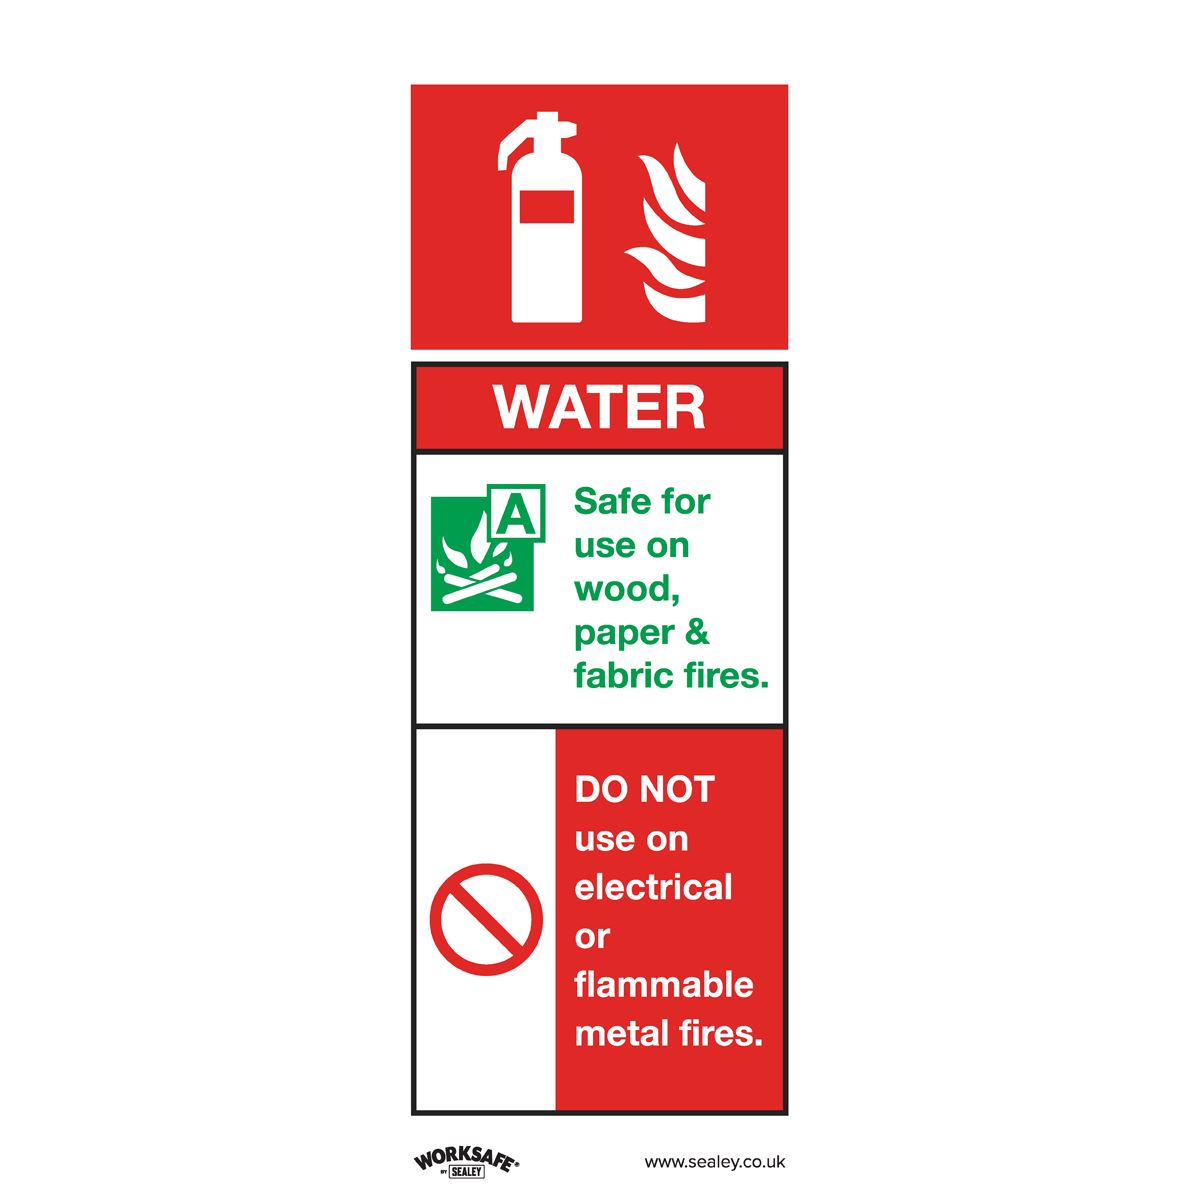 Worksafe by Sealey Safe Conditions Safety Sign - Water Fire Extinguisher - Rigid Plastic - Pack of 10